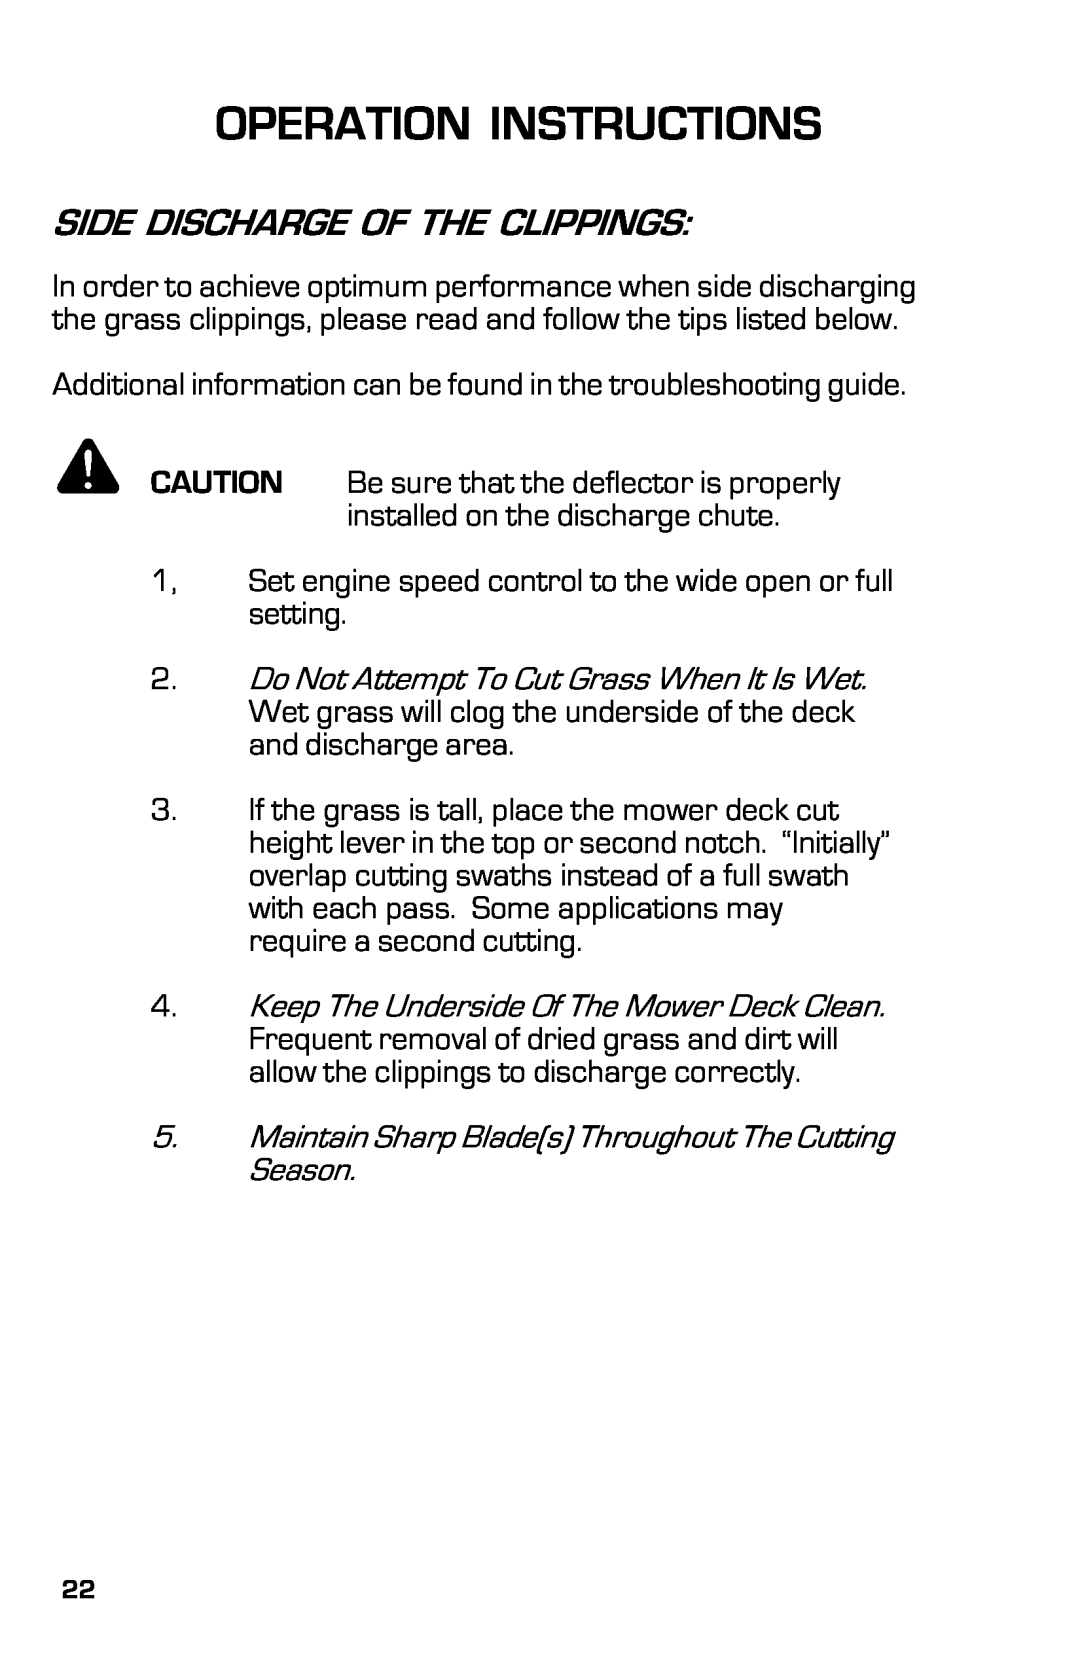 Dixon 2003, 13639-0702 manual Operation Instructions, Side Discharge Of The Clippings 